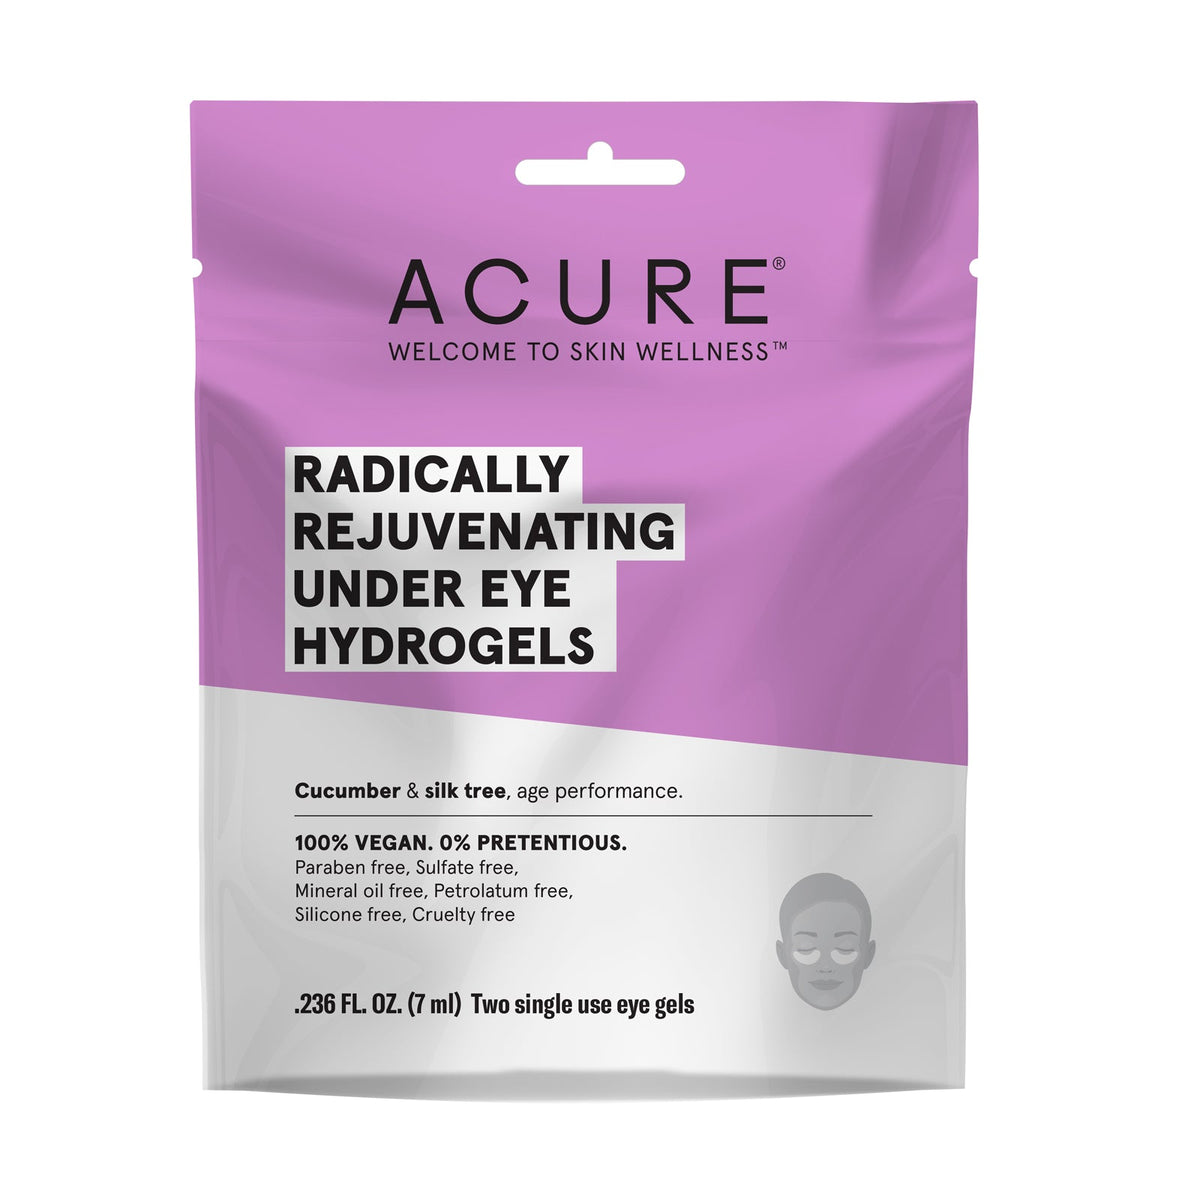 ACURE - Radically Rejuvenating Under Eye Hydrogels - ProCare Outlet by Acure